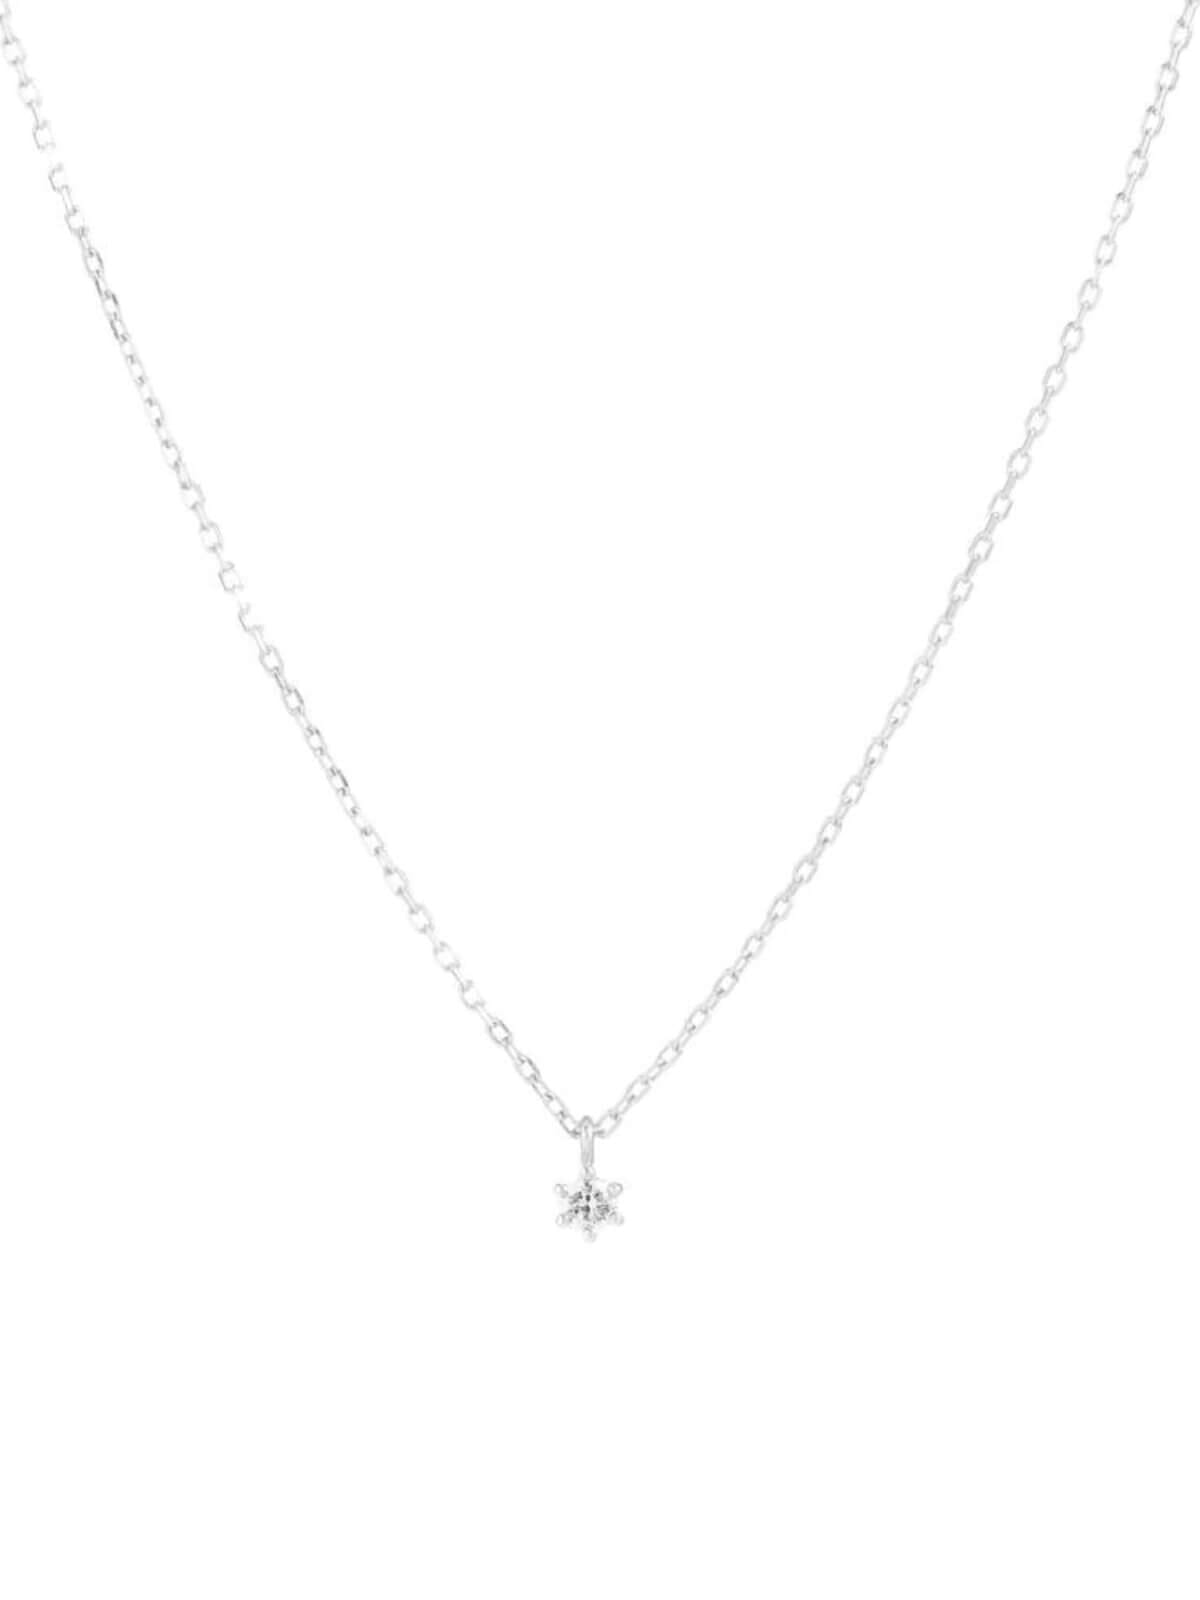 By Charlotte | 14K White Gold Sweet Droplet Diamond Necklace | Perlu